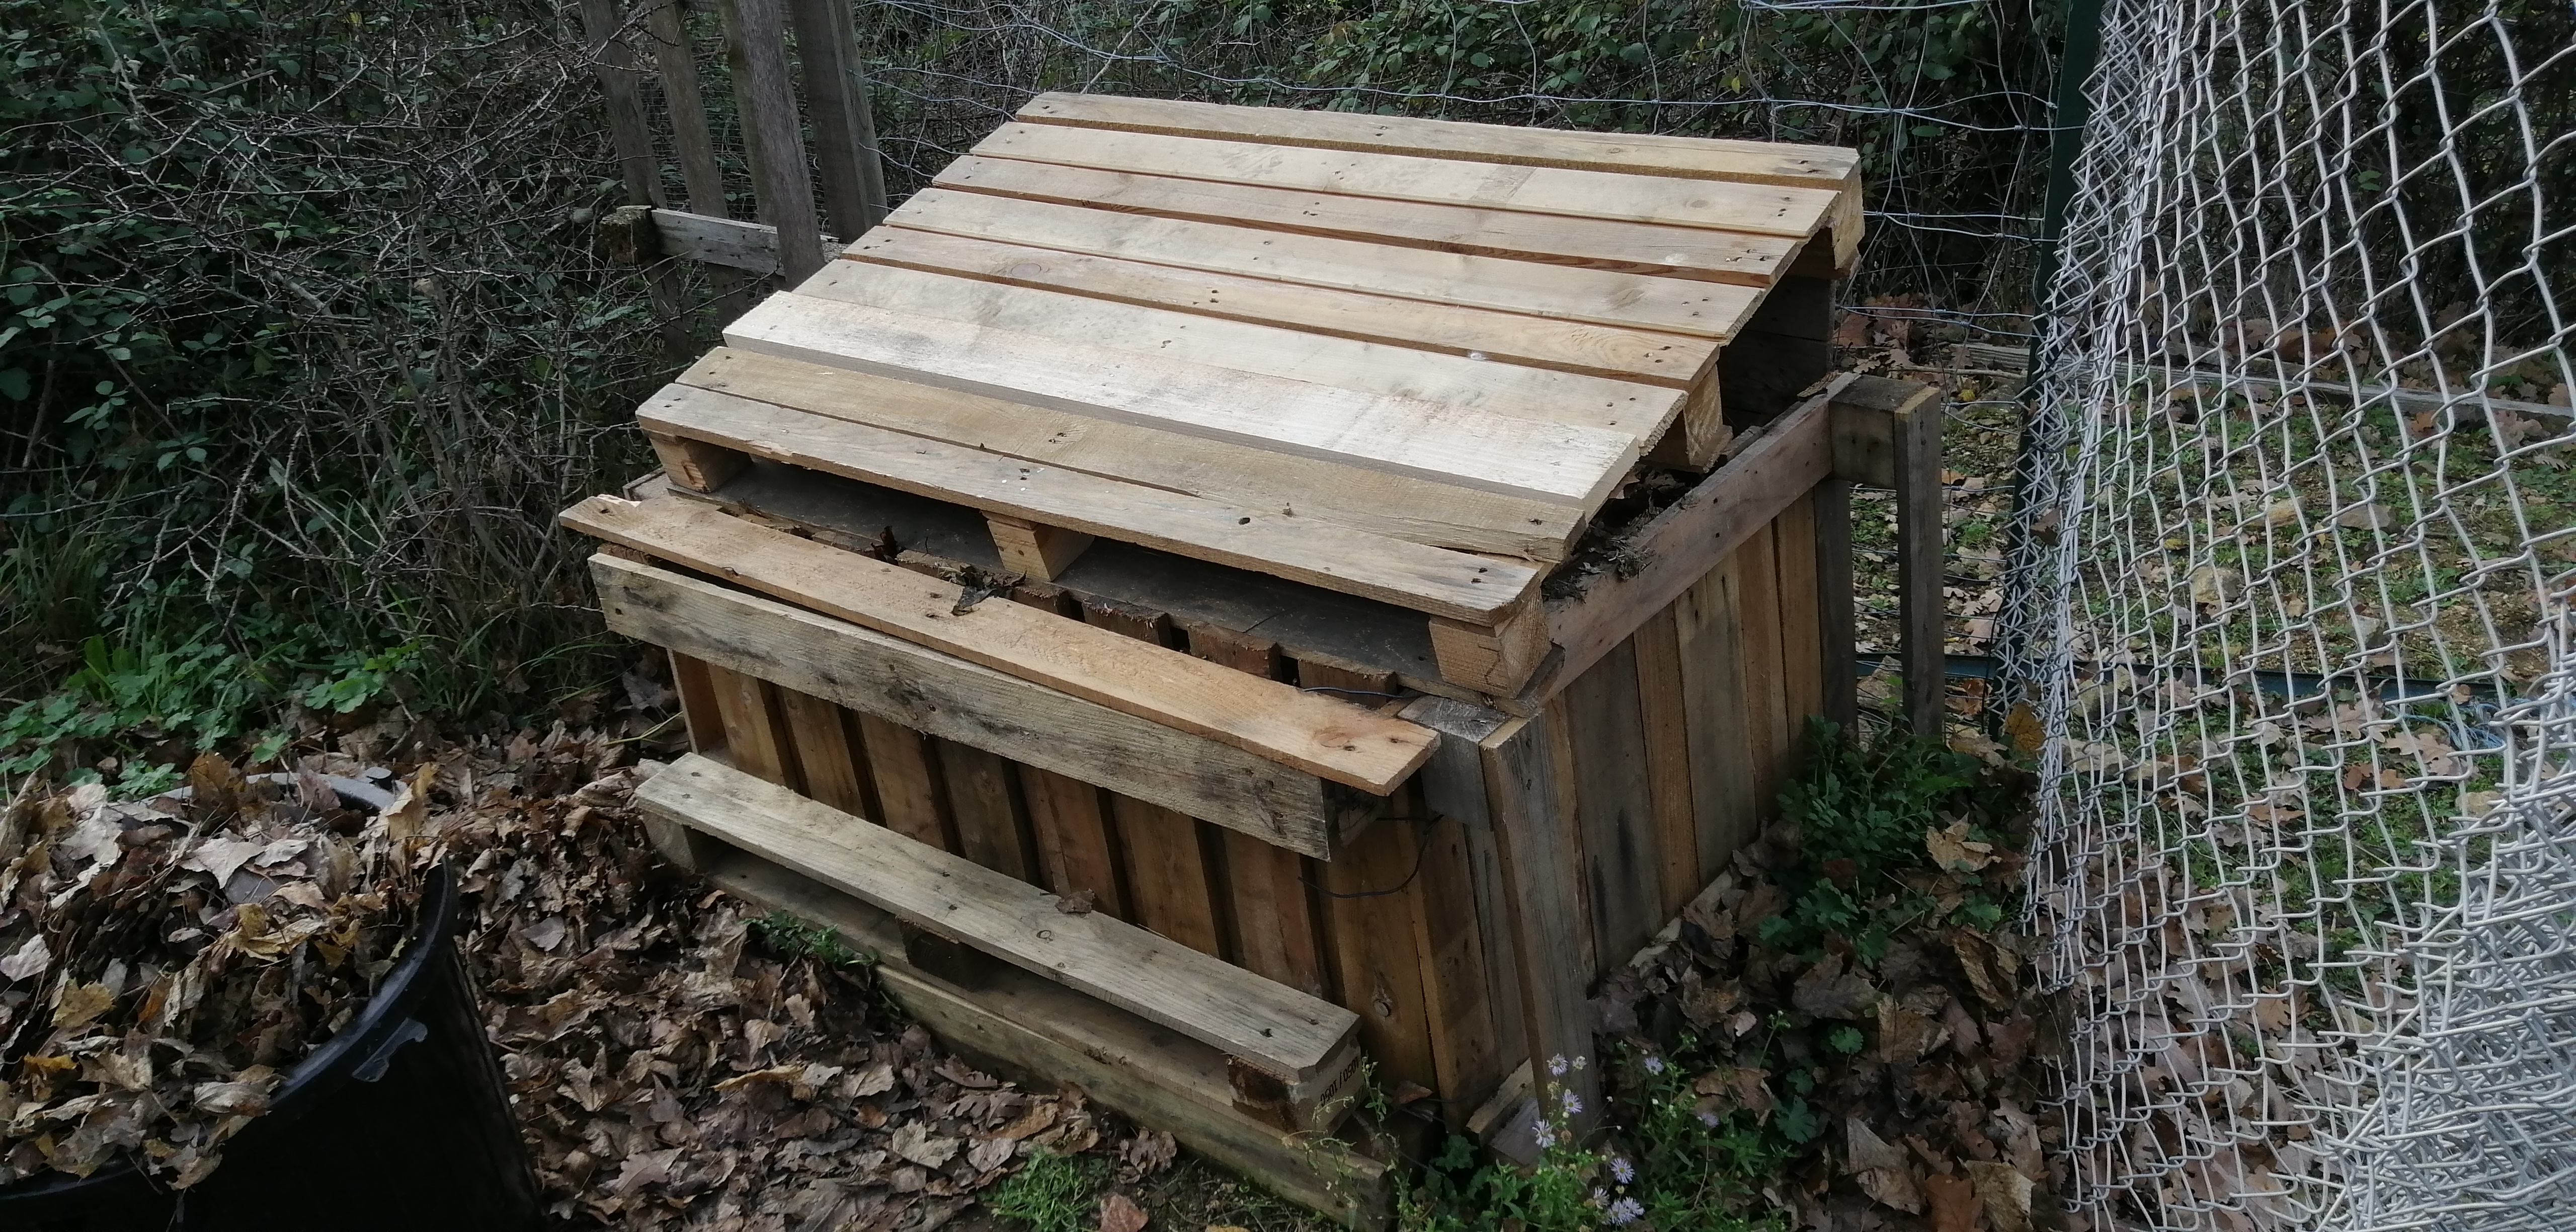 Full compost bin with top cover down